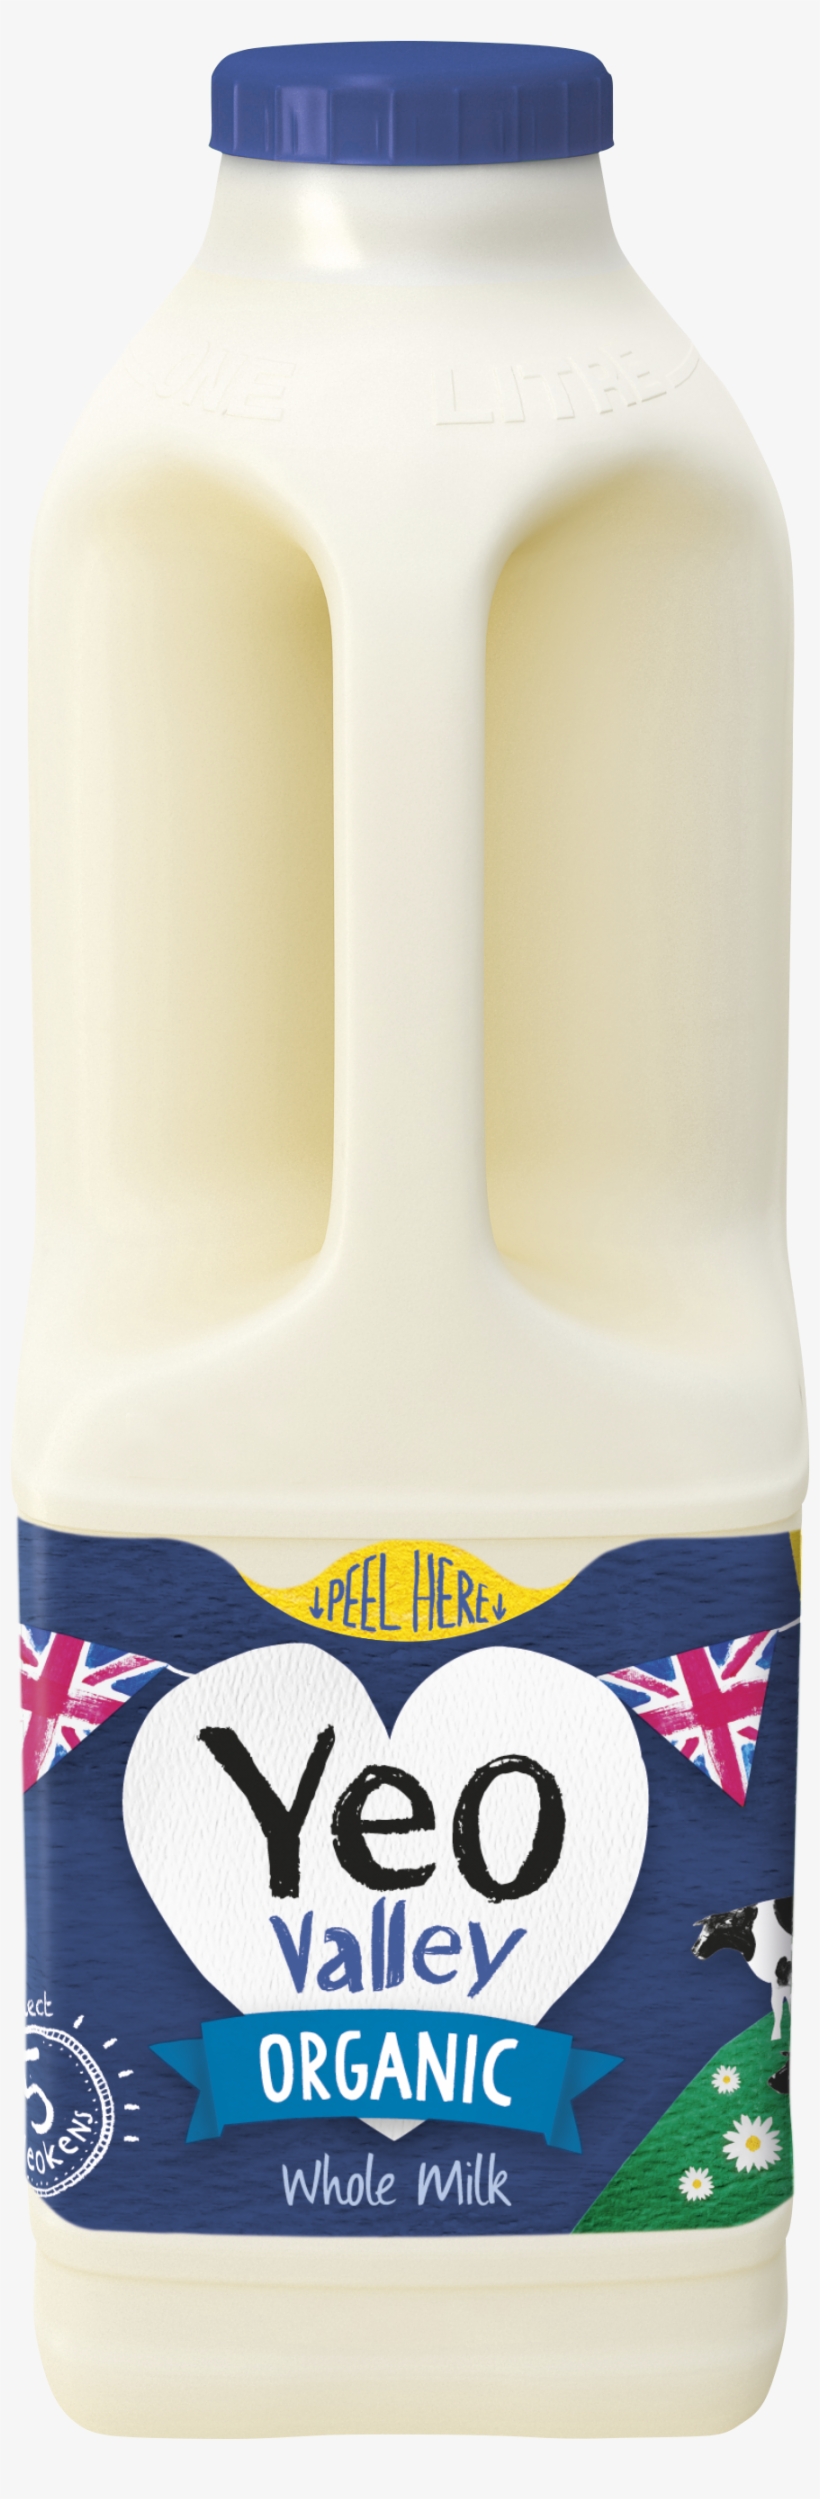 Yeo Valley Whole Milk, transparent png #10065059